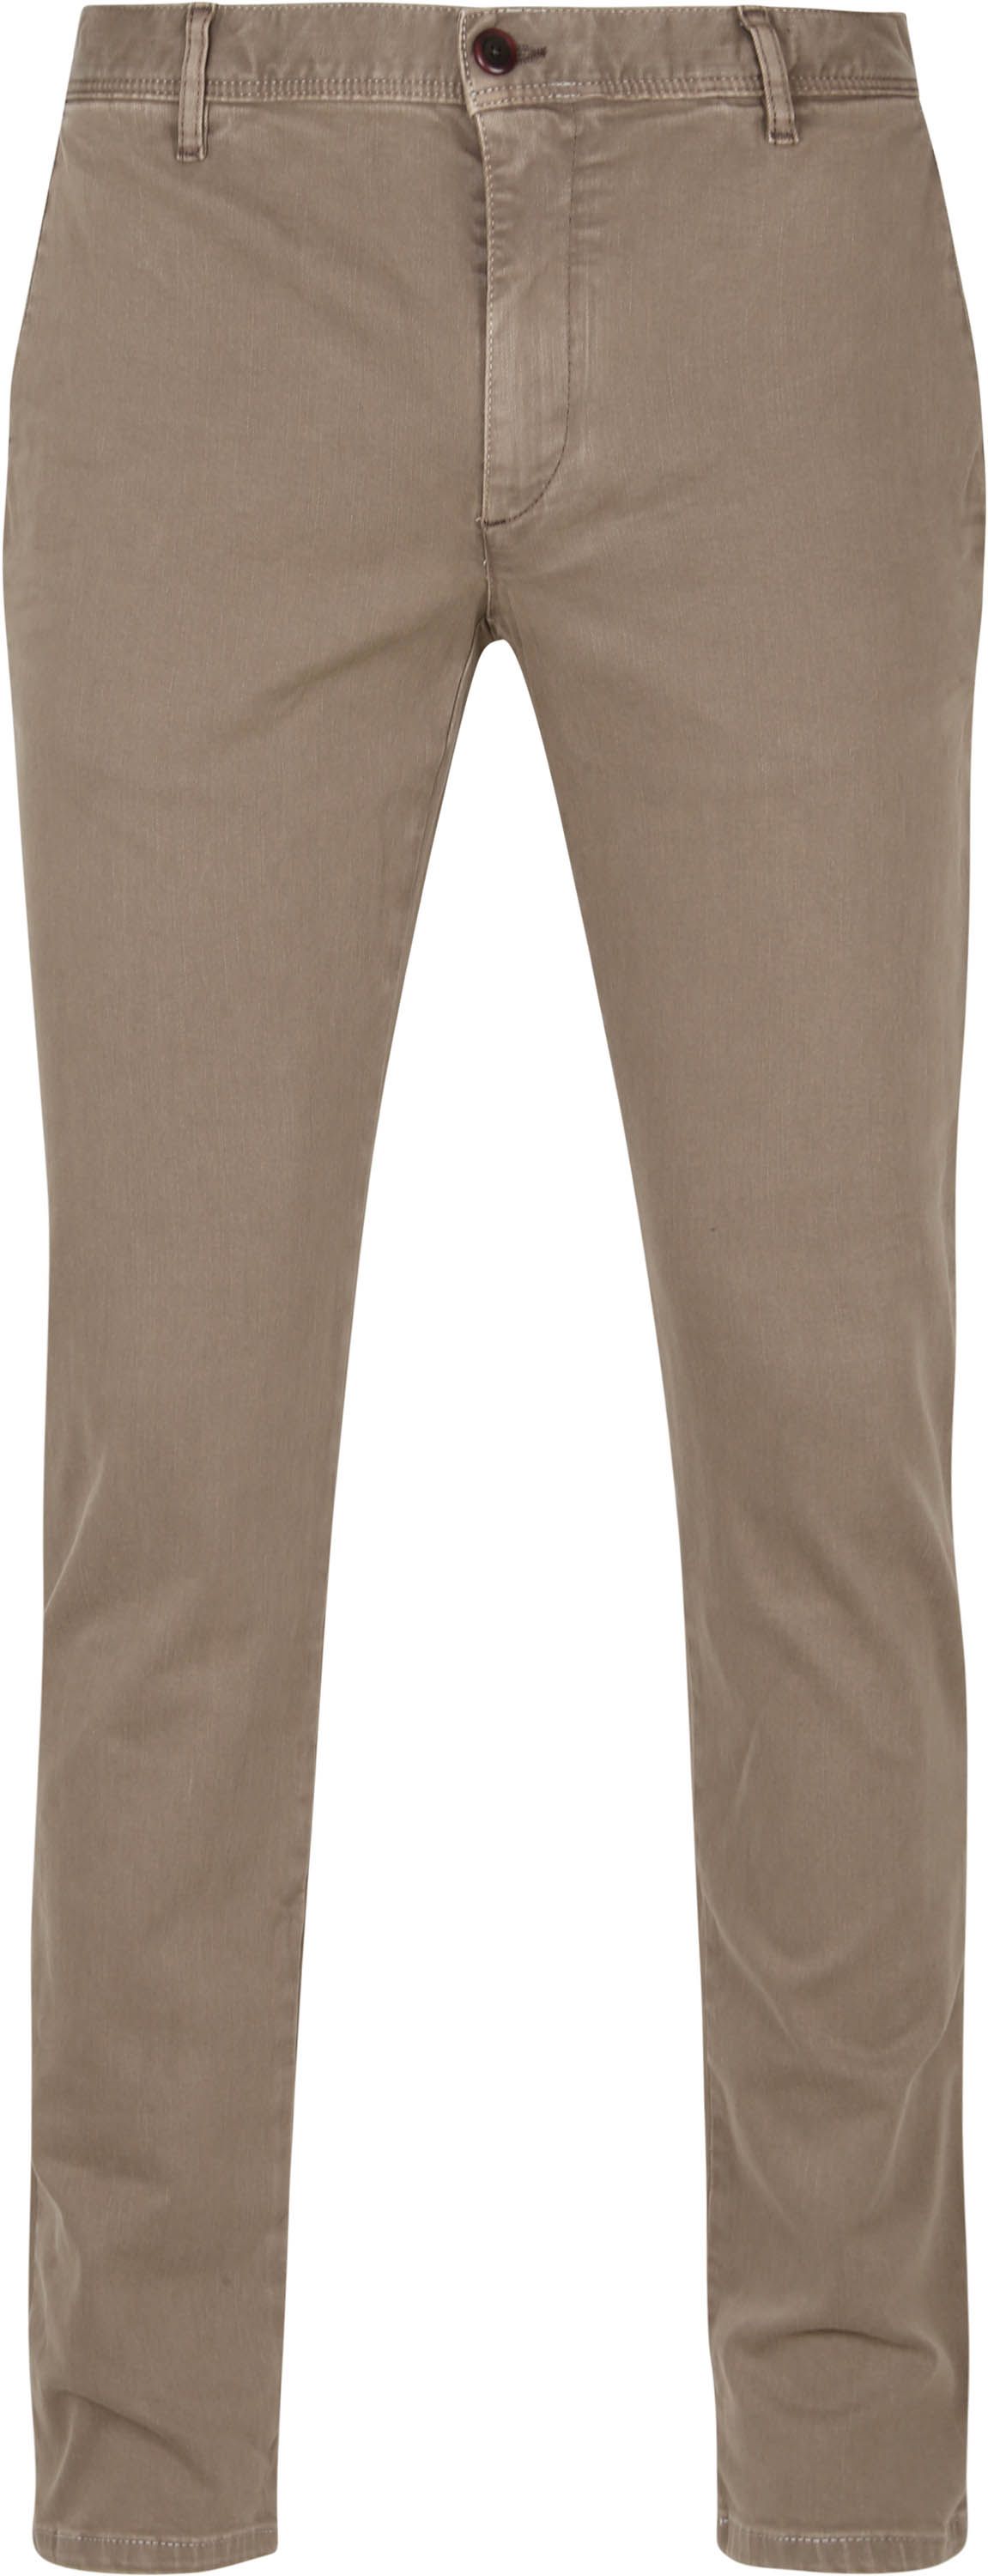 Alberto Chino Rob T400 Dynamic Beige taille W 31